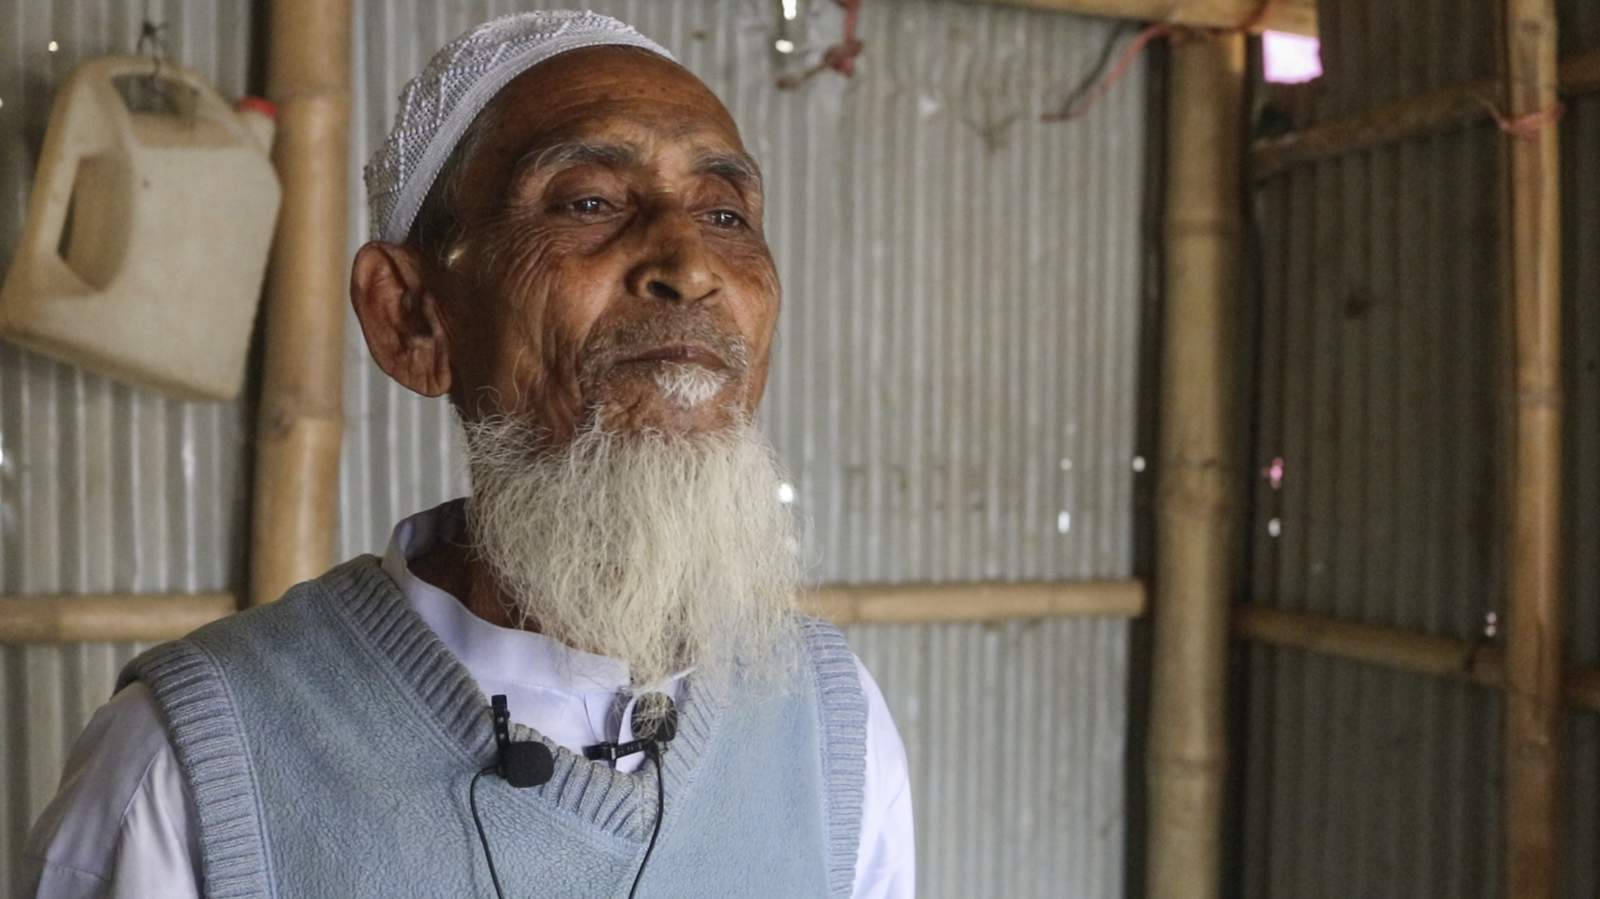 Rohingya refugees fear returning to Myanmar after coup